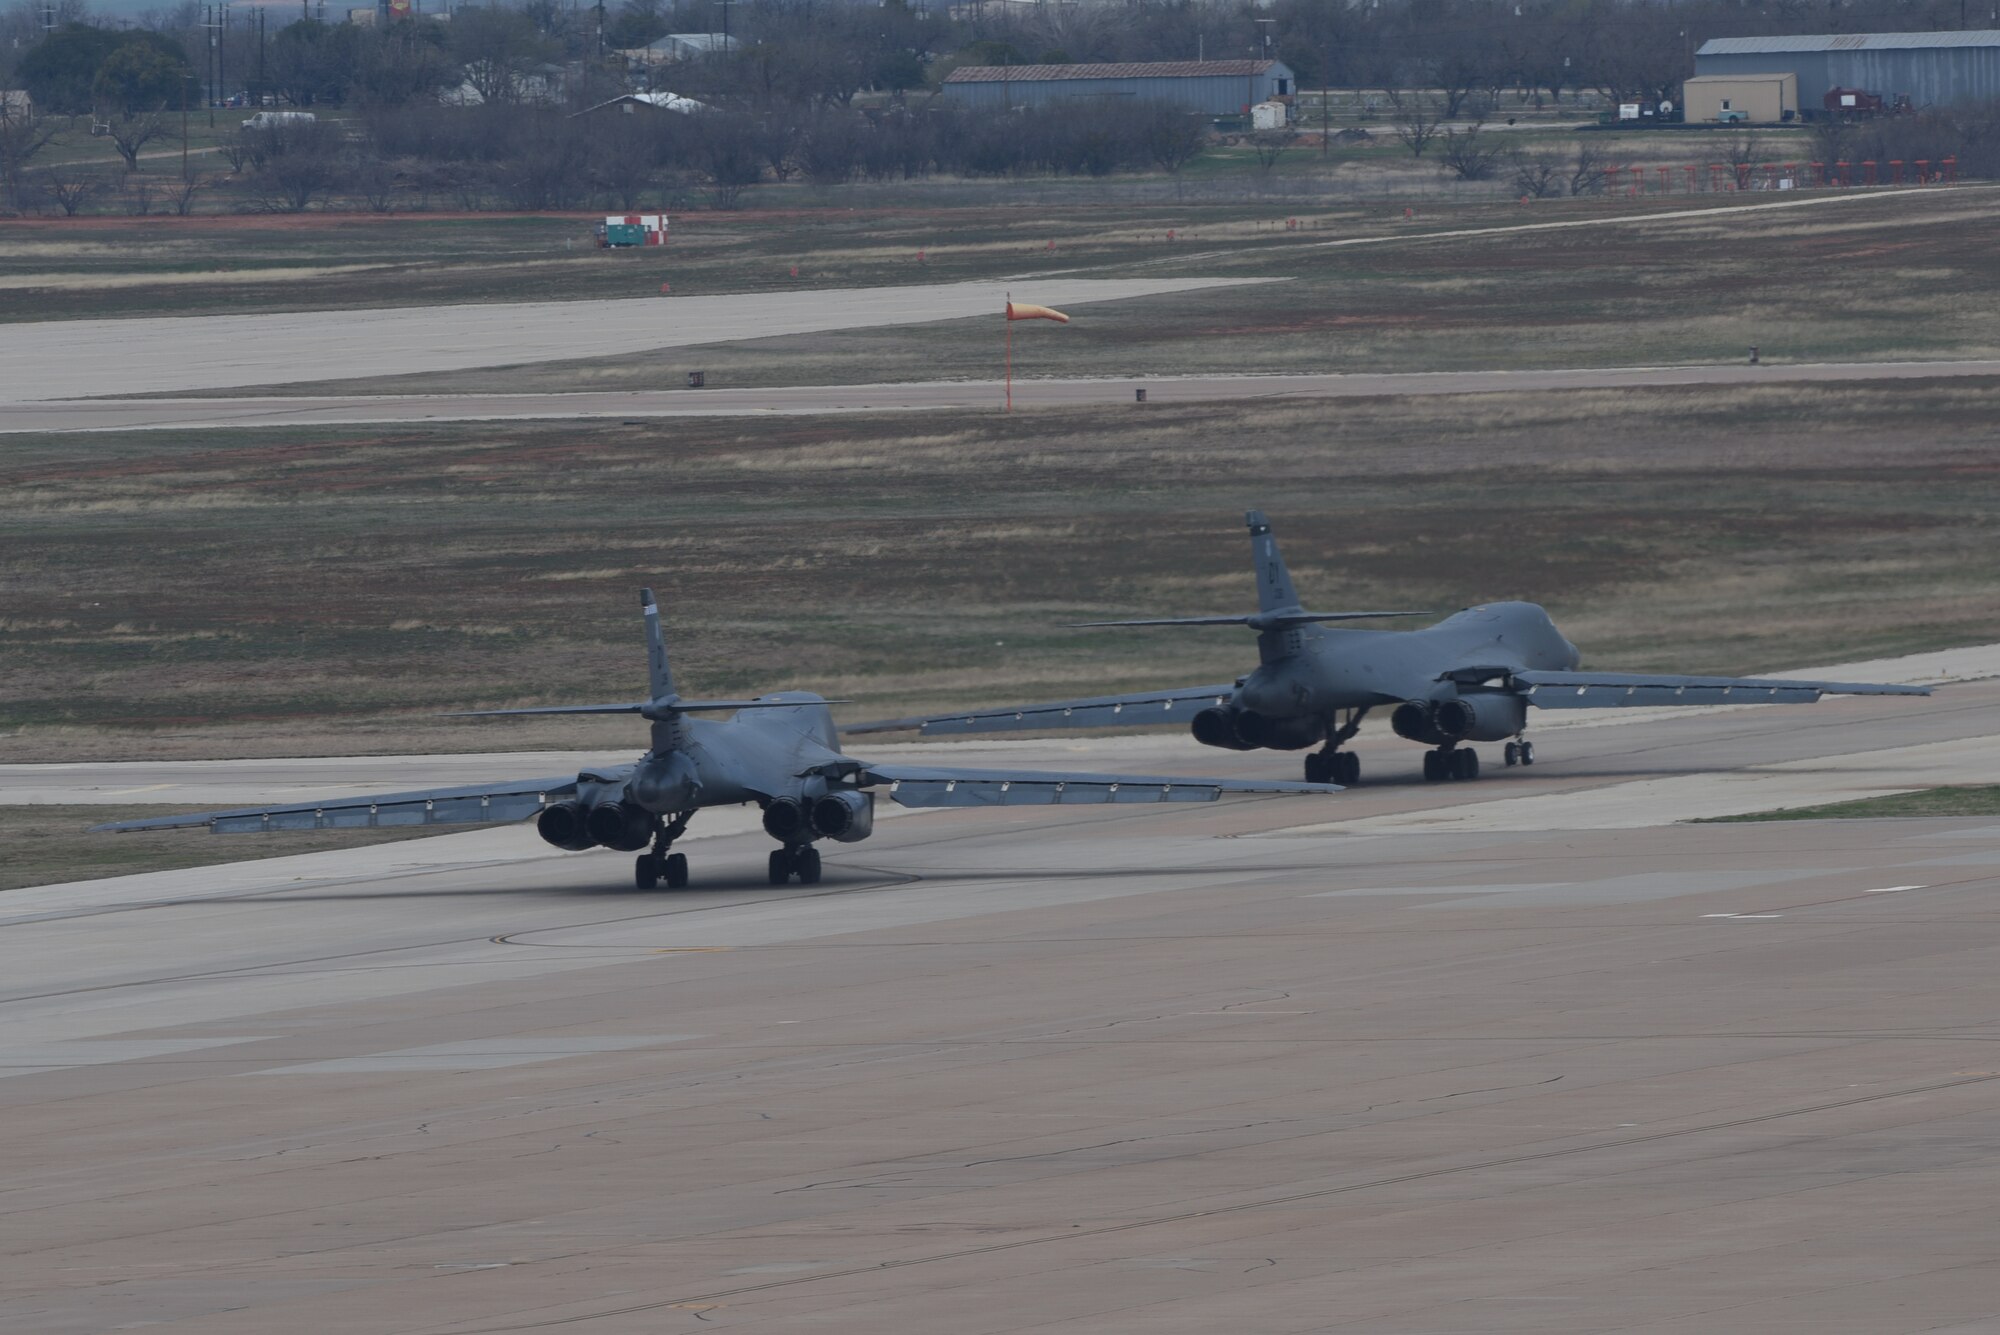 Two B-1B Lancers taxi on the runway at Dyess Air Force Base, Texas, March 22, 2023. In preparation for possible inclement weather, Dyess Airmen rapidly prepared over a dozen aircraft to relocate, successfully demonstrating America’s Lift and Strike Base’s ability to achieve dynamic force employment while using agile combat employment. The B-1s were temporarily relocated to Holloman Air Force Base, New Mexico, while the C-130s flew to several airfields throughout the United States. (U.S. Air Force photo by Senior Airman Sophia Robello)